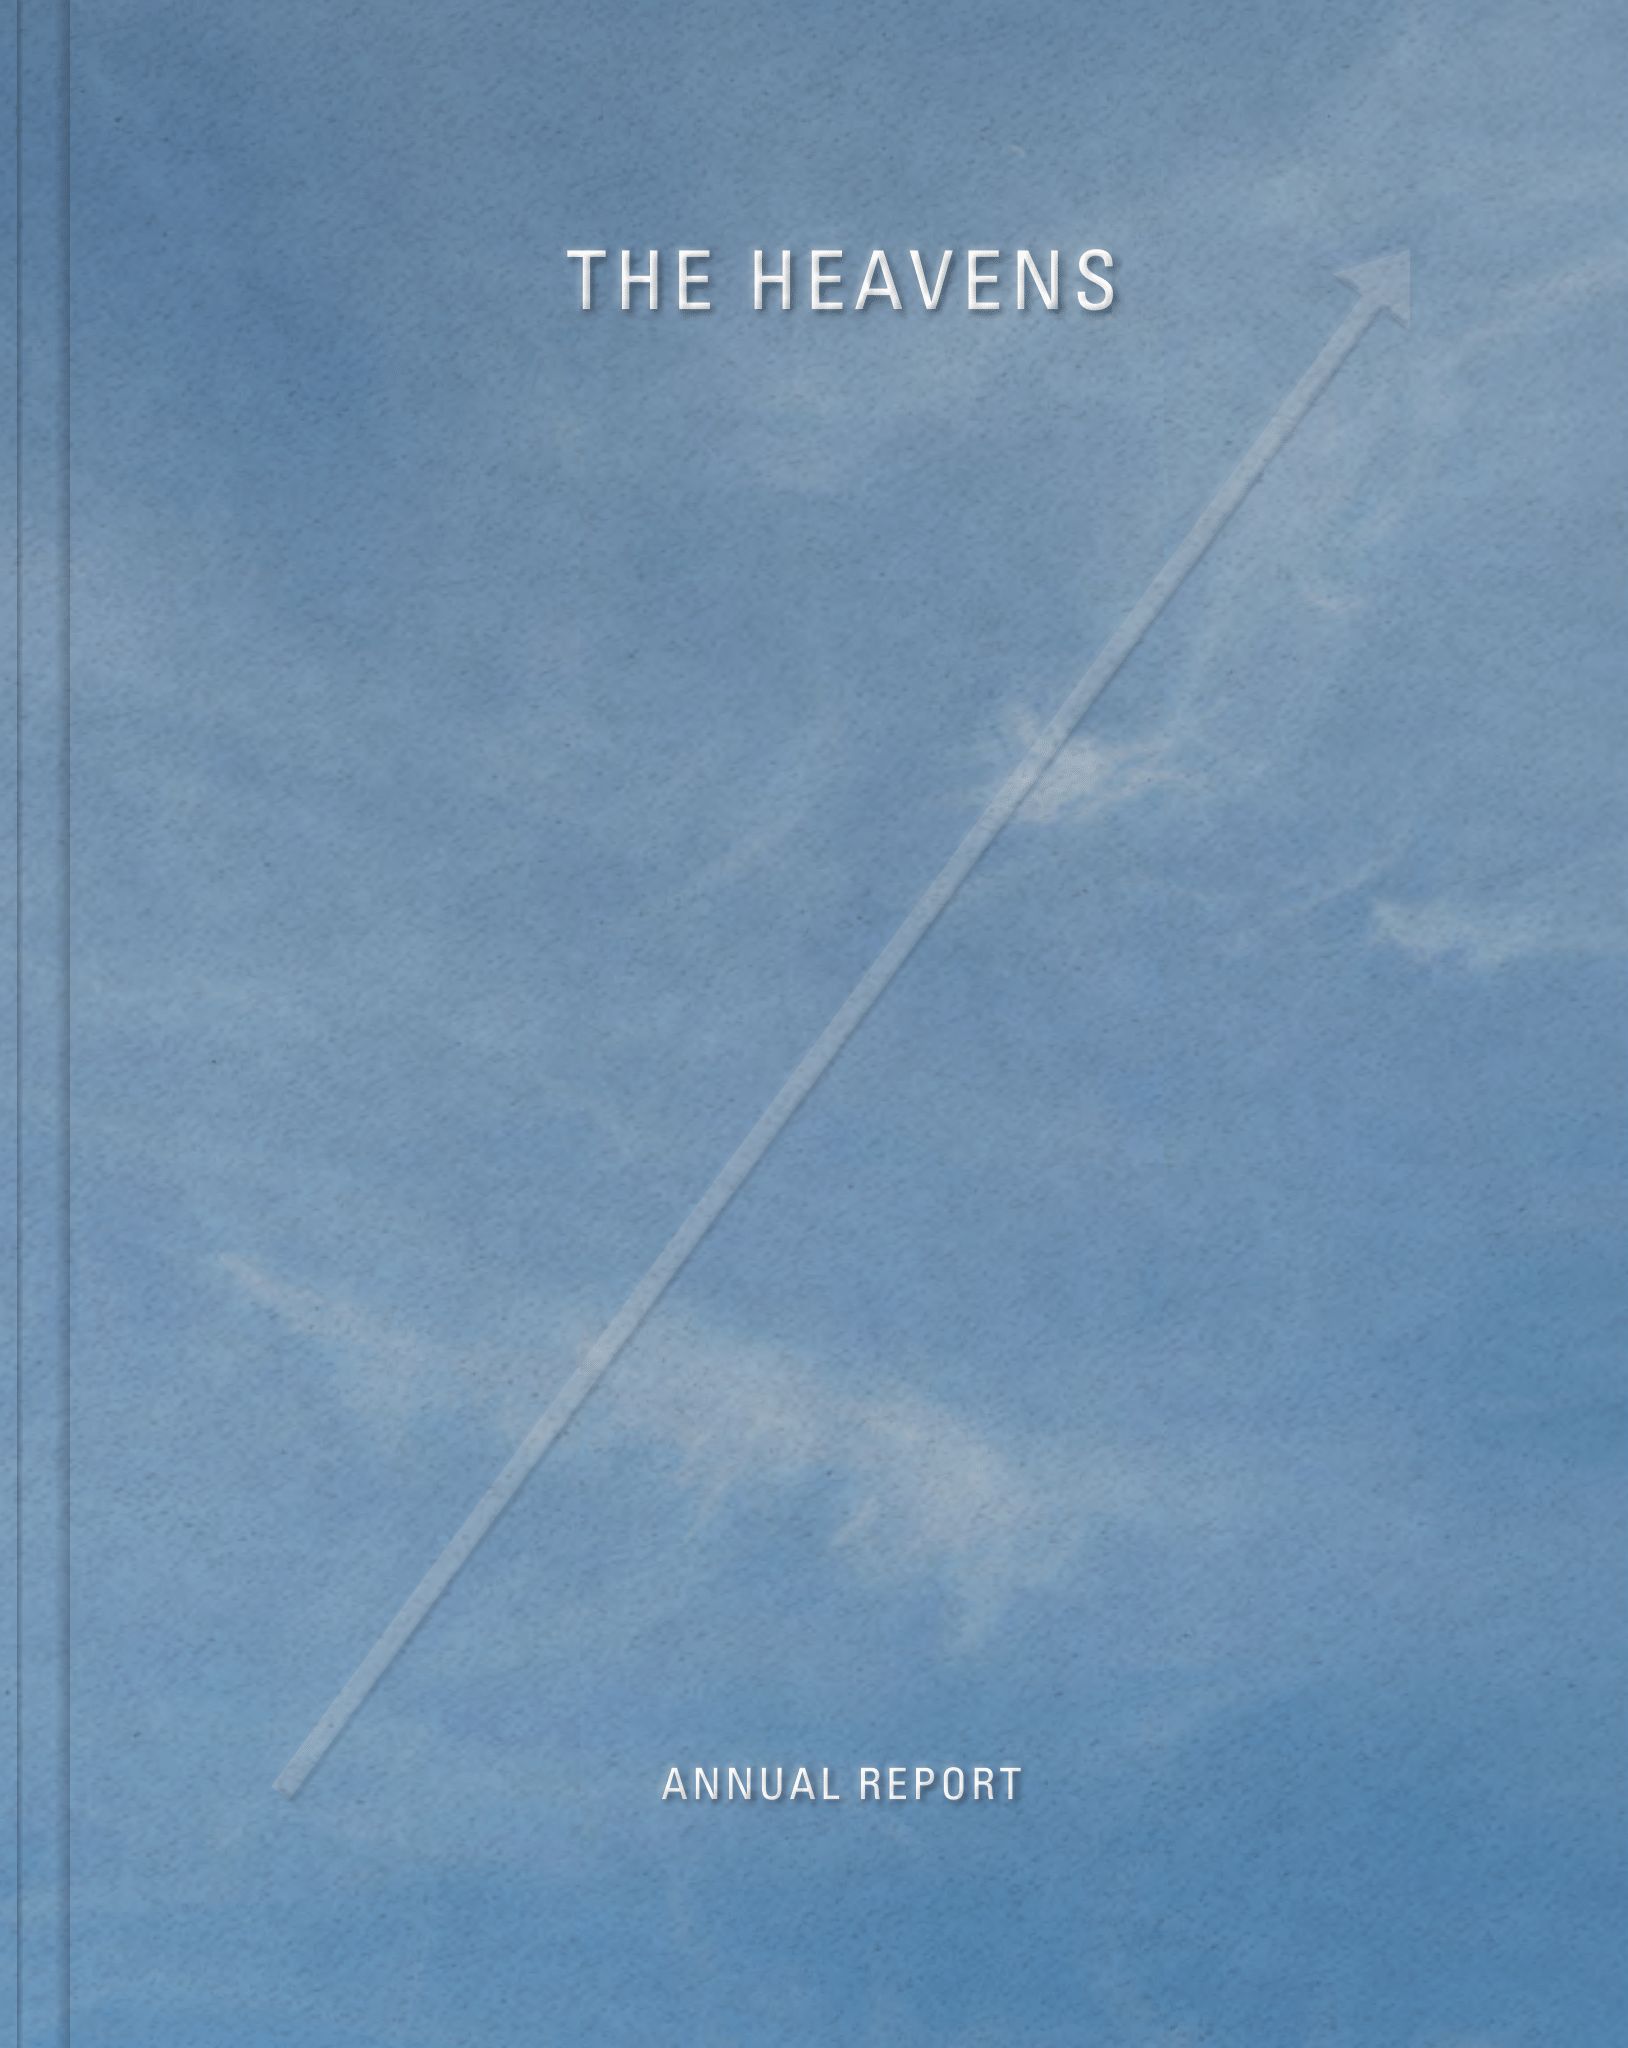 Book cover with an overall design of thin white clouds in a blue sky, with a long, pale arrow reaching from the bottom left to the top right. Printed on the cover are "THE HEAVENS" at top and "ANNUAL REPORT" at bottom.